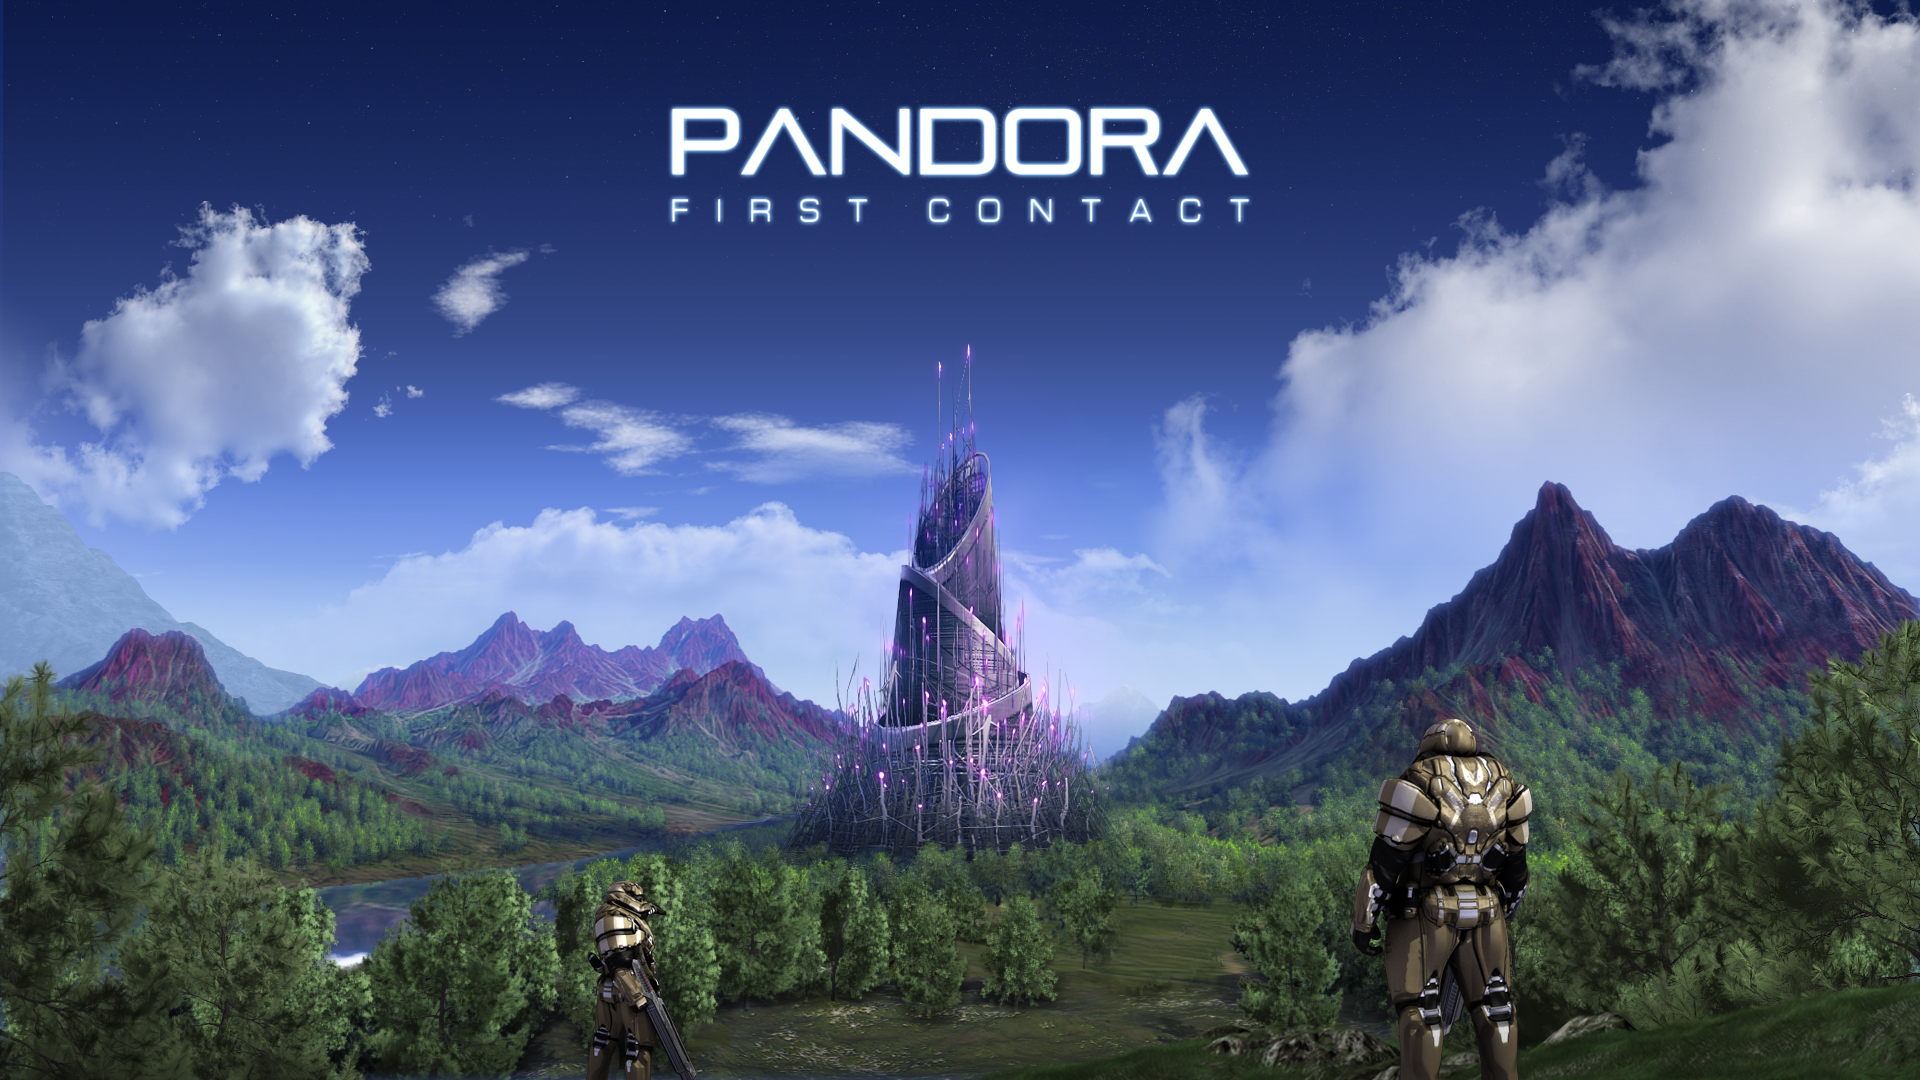 download pandora first contact gold edition for free